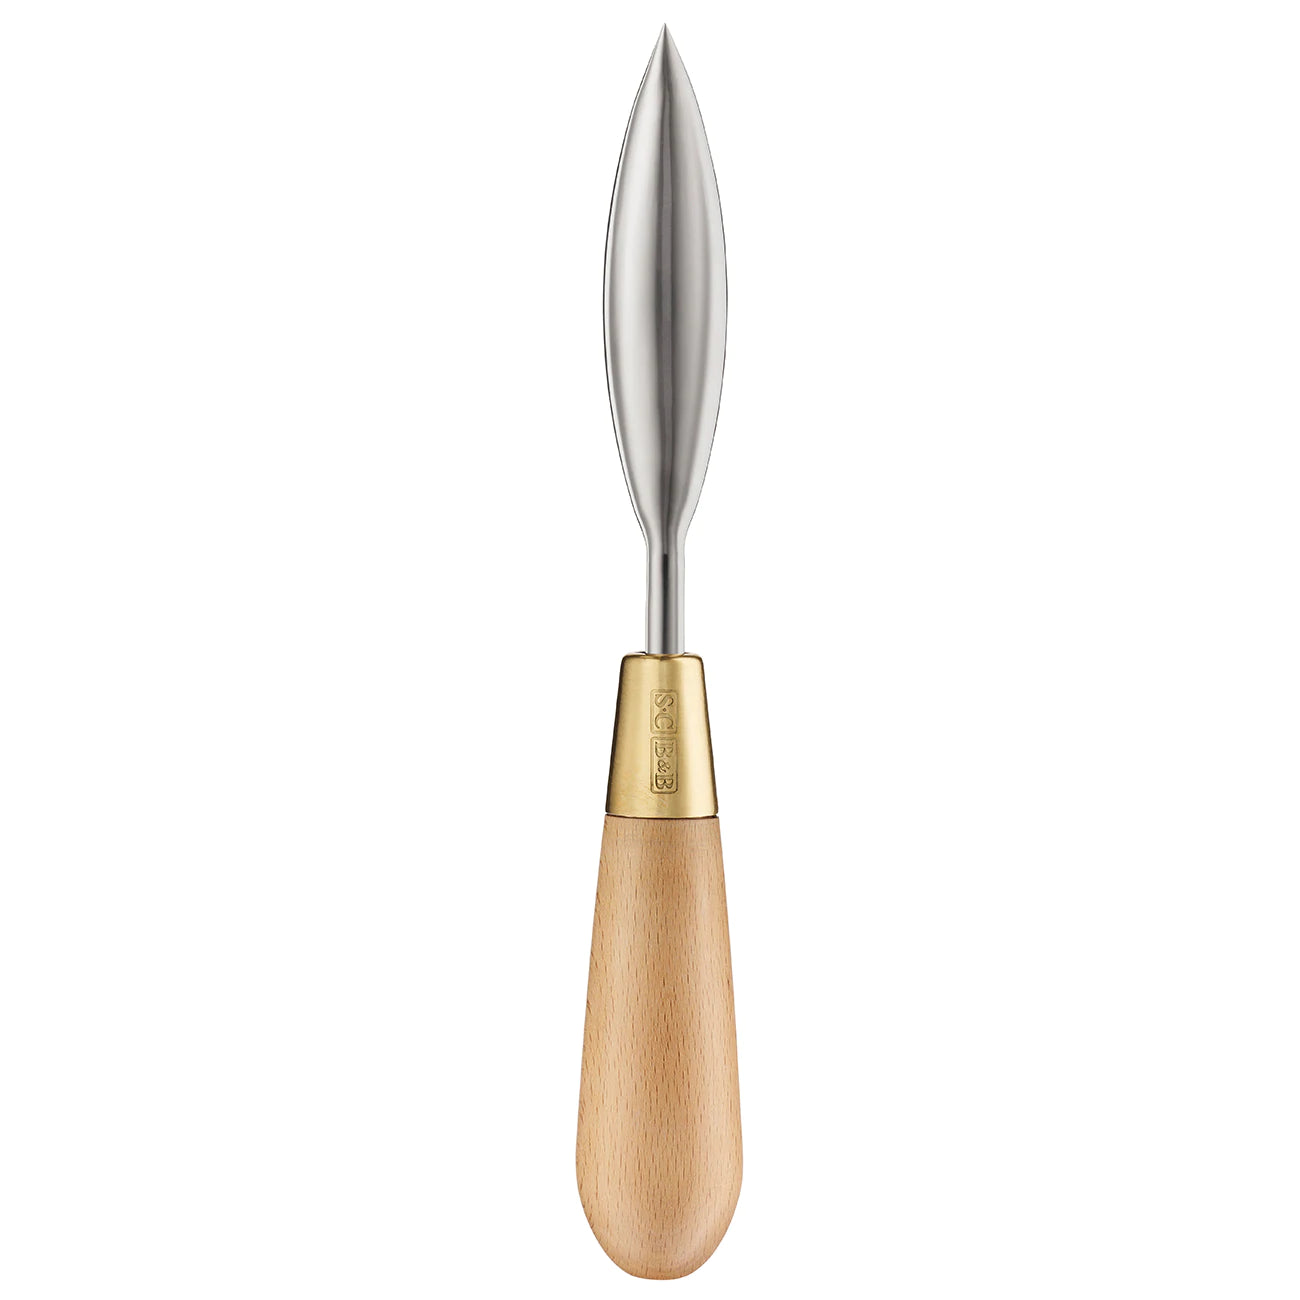 This dibber has a waxed FSC beechwood handle, brass ferrule and stainless steel head.